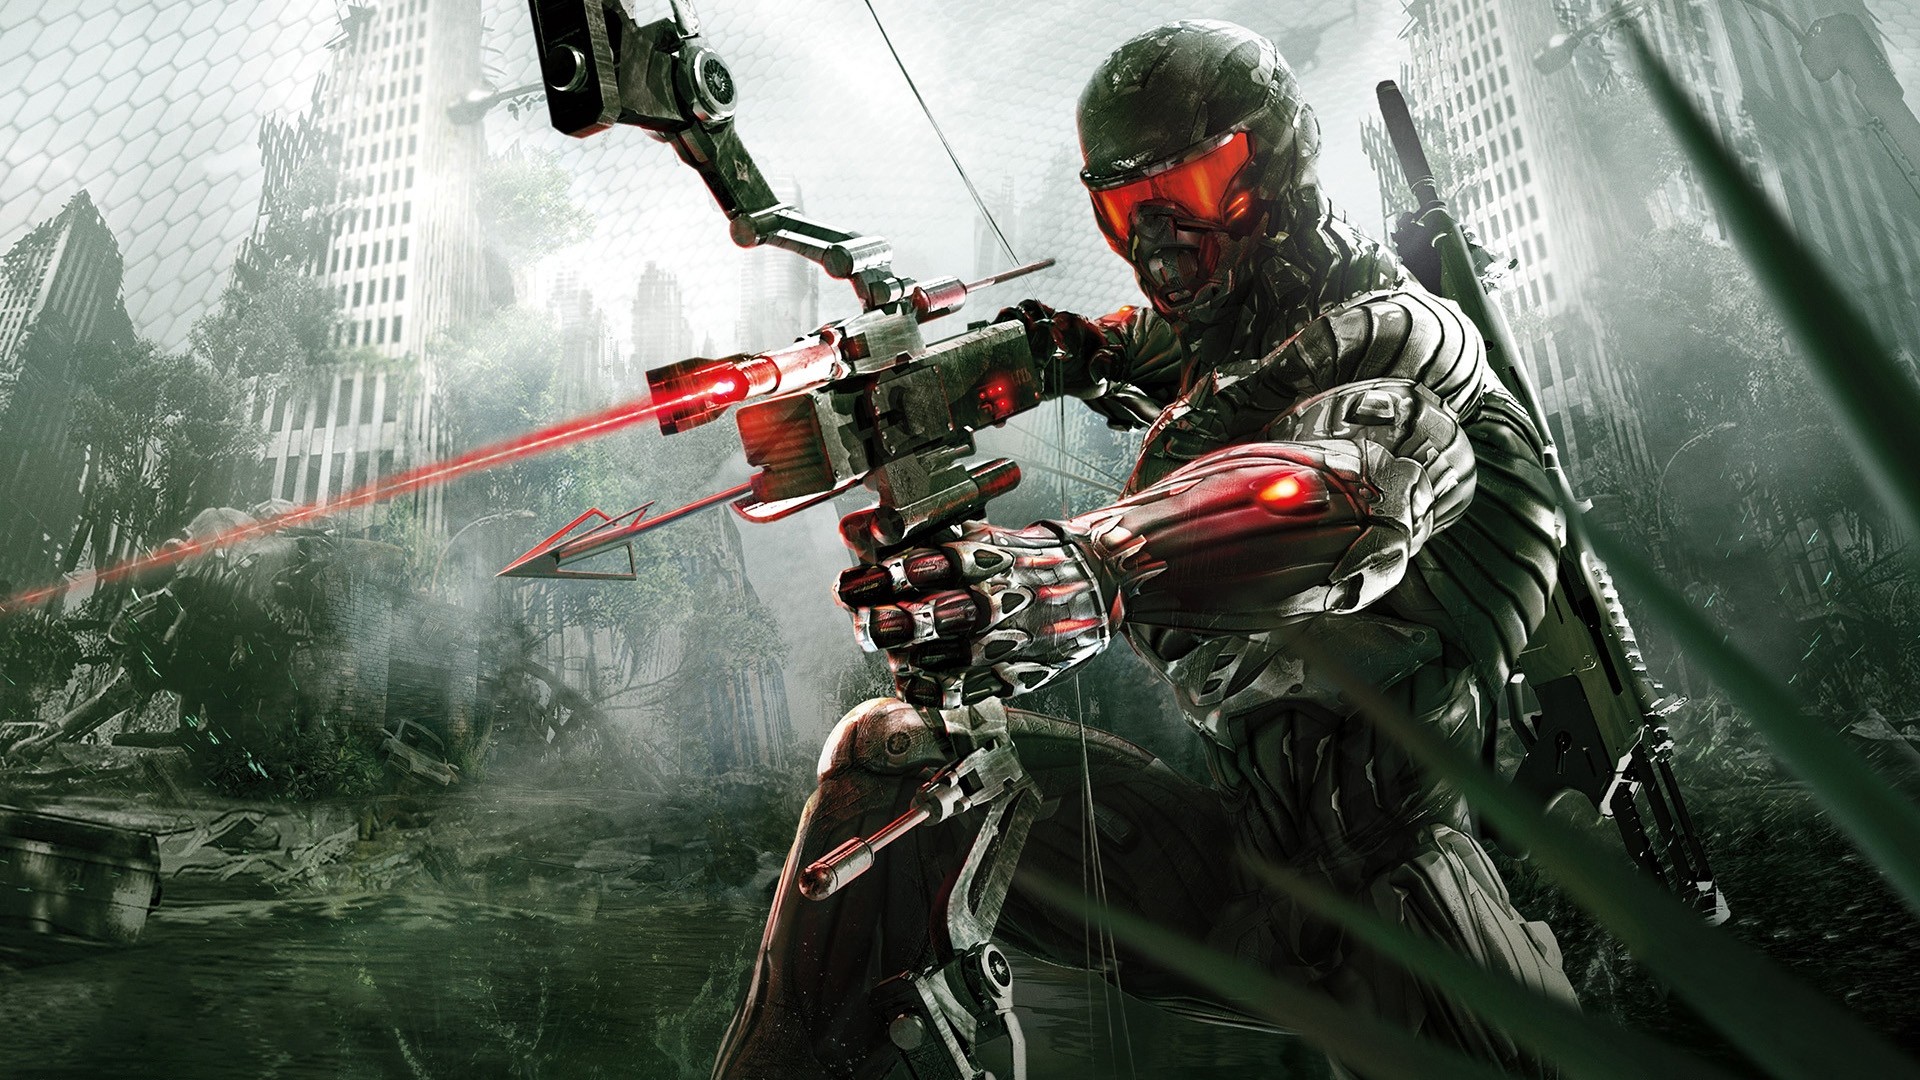 General 1920x1080 Crysis 3 artwork video games bow weapon ruins science fiction video game art